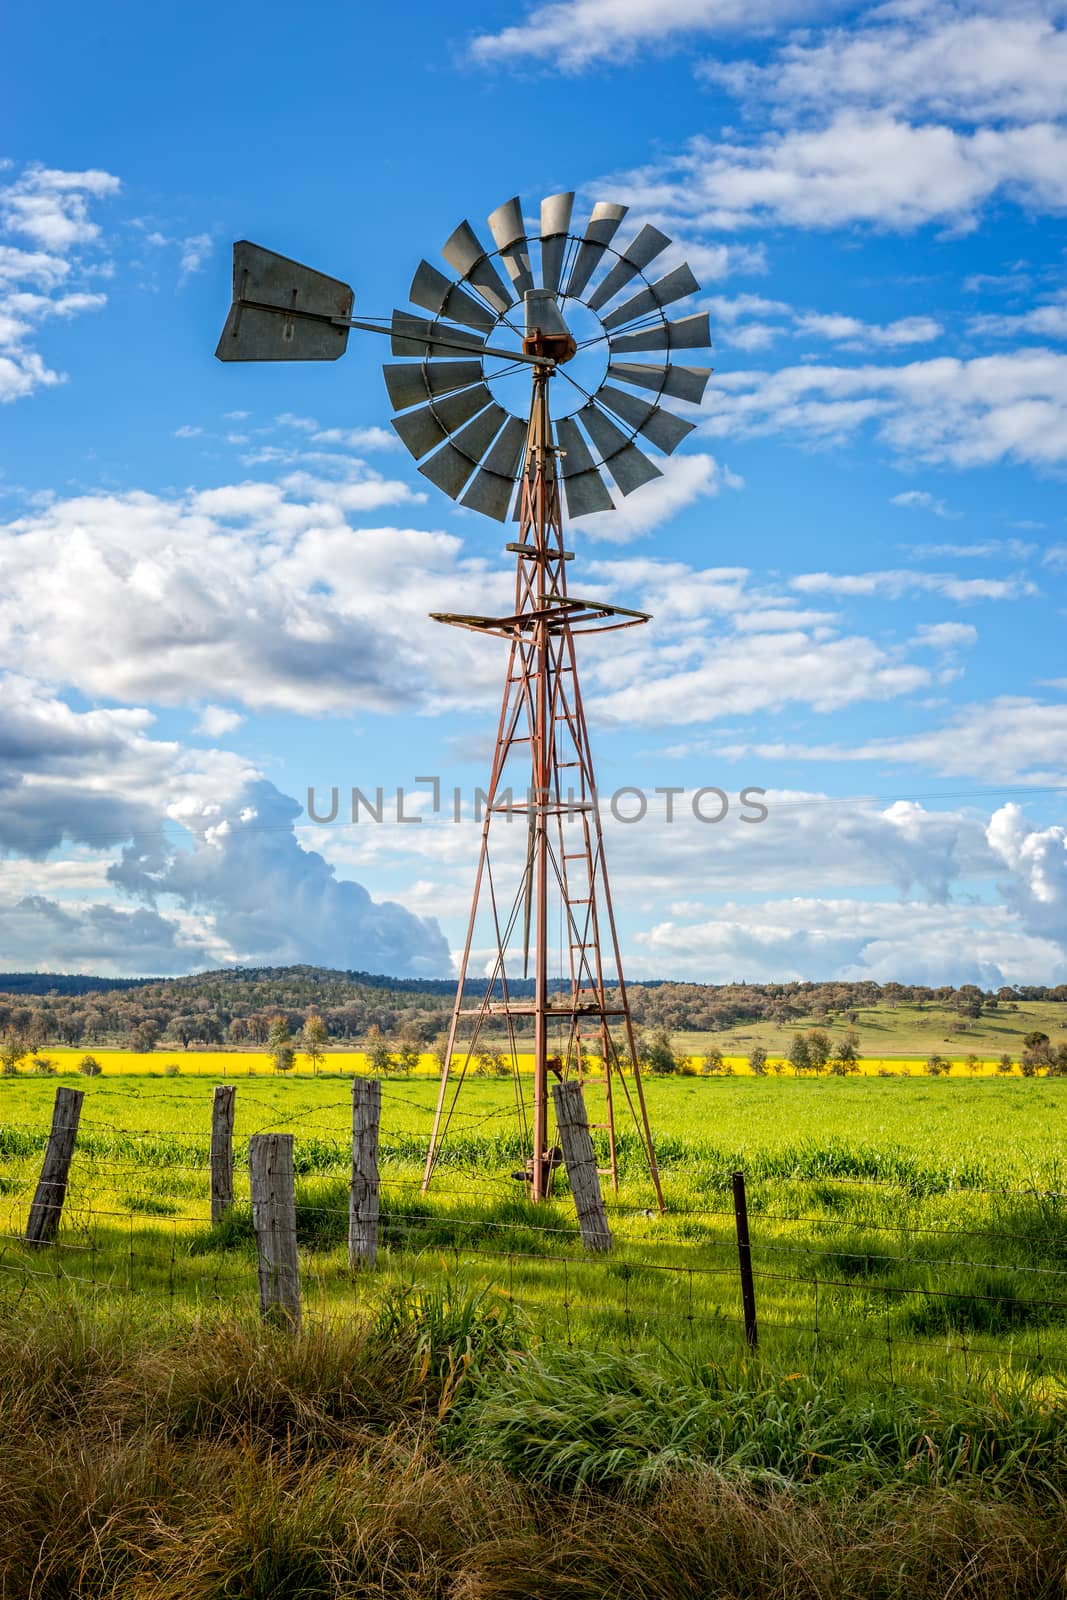 Southern cross windmill in a rural field with crops growing under a blue sky